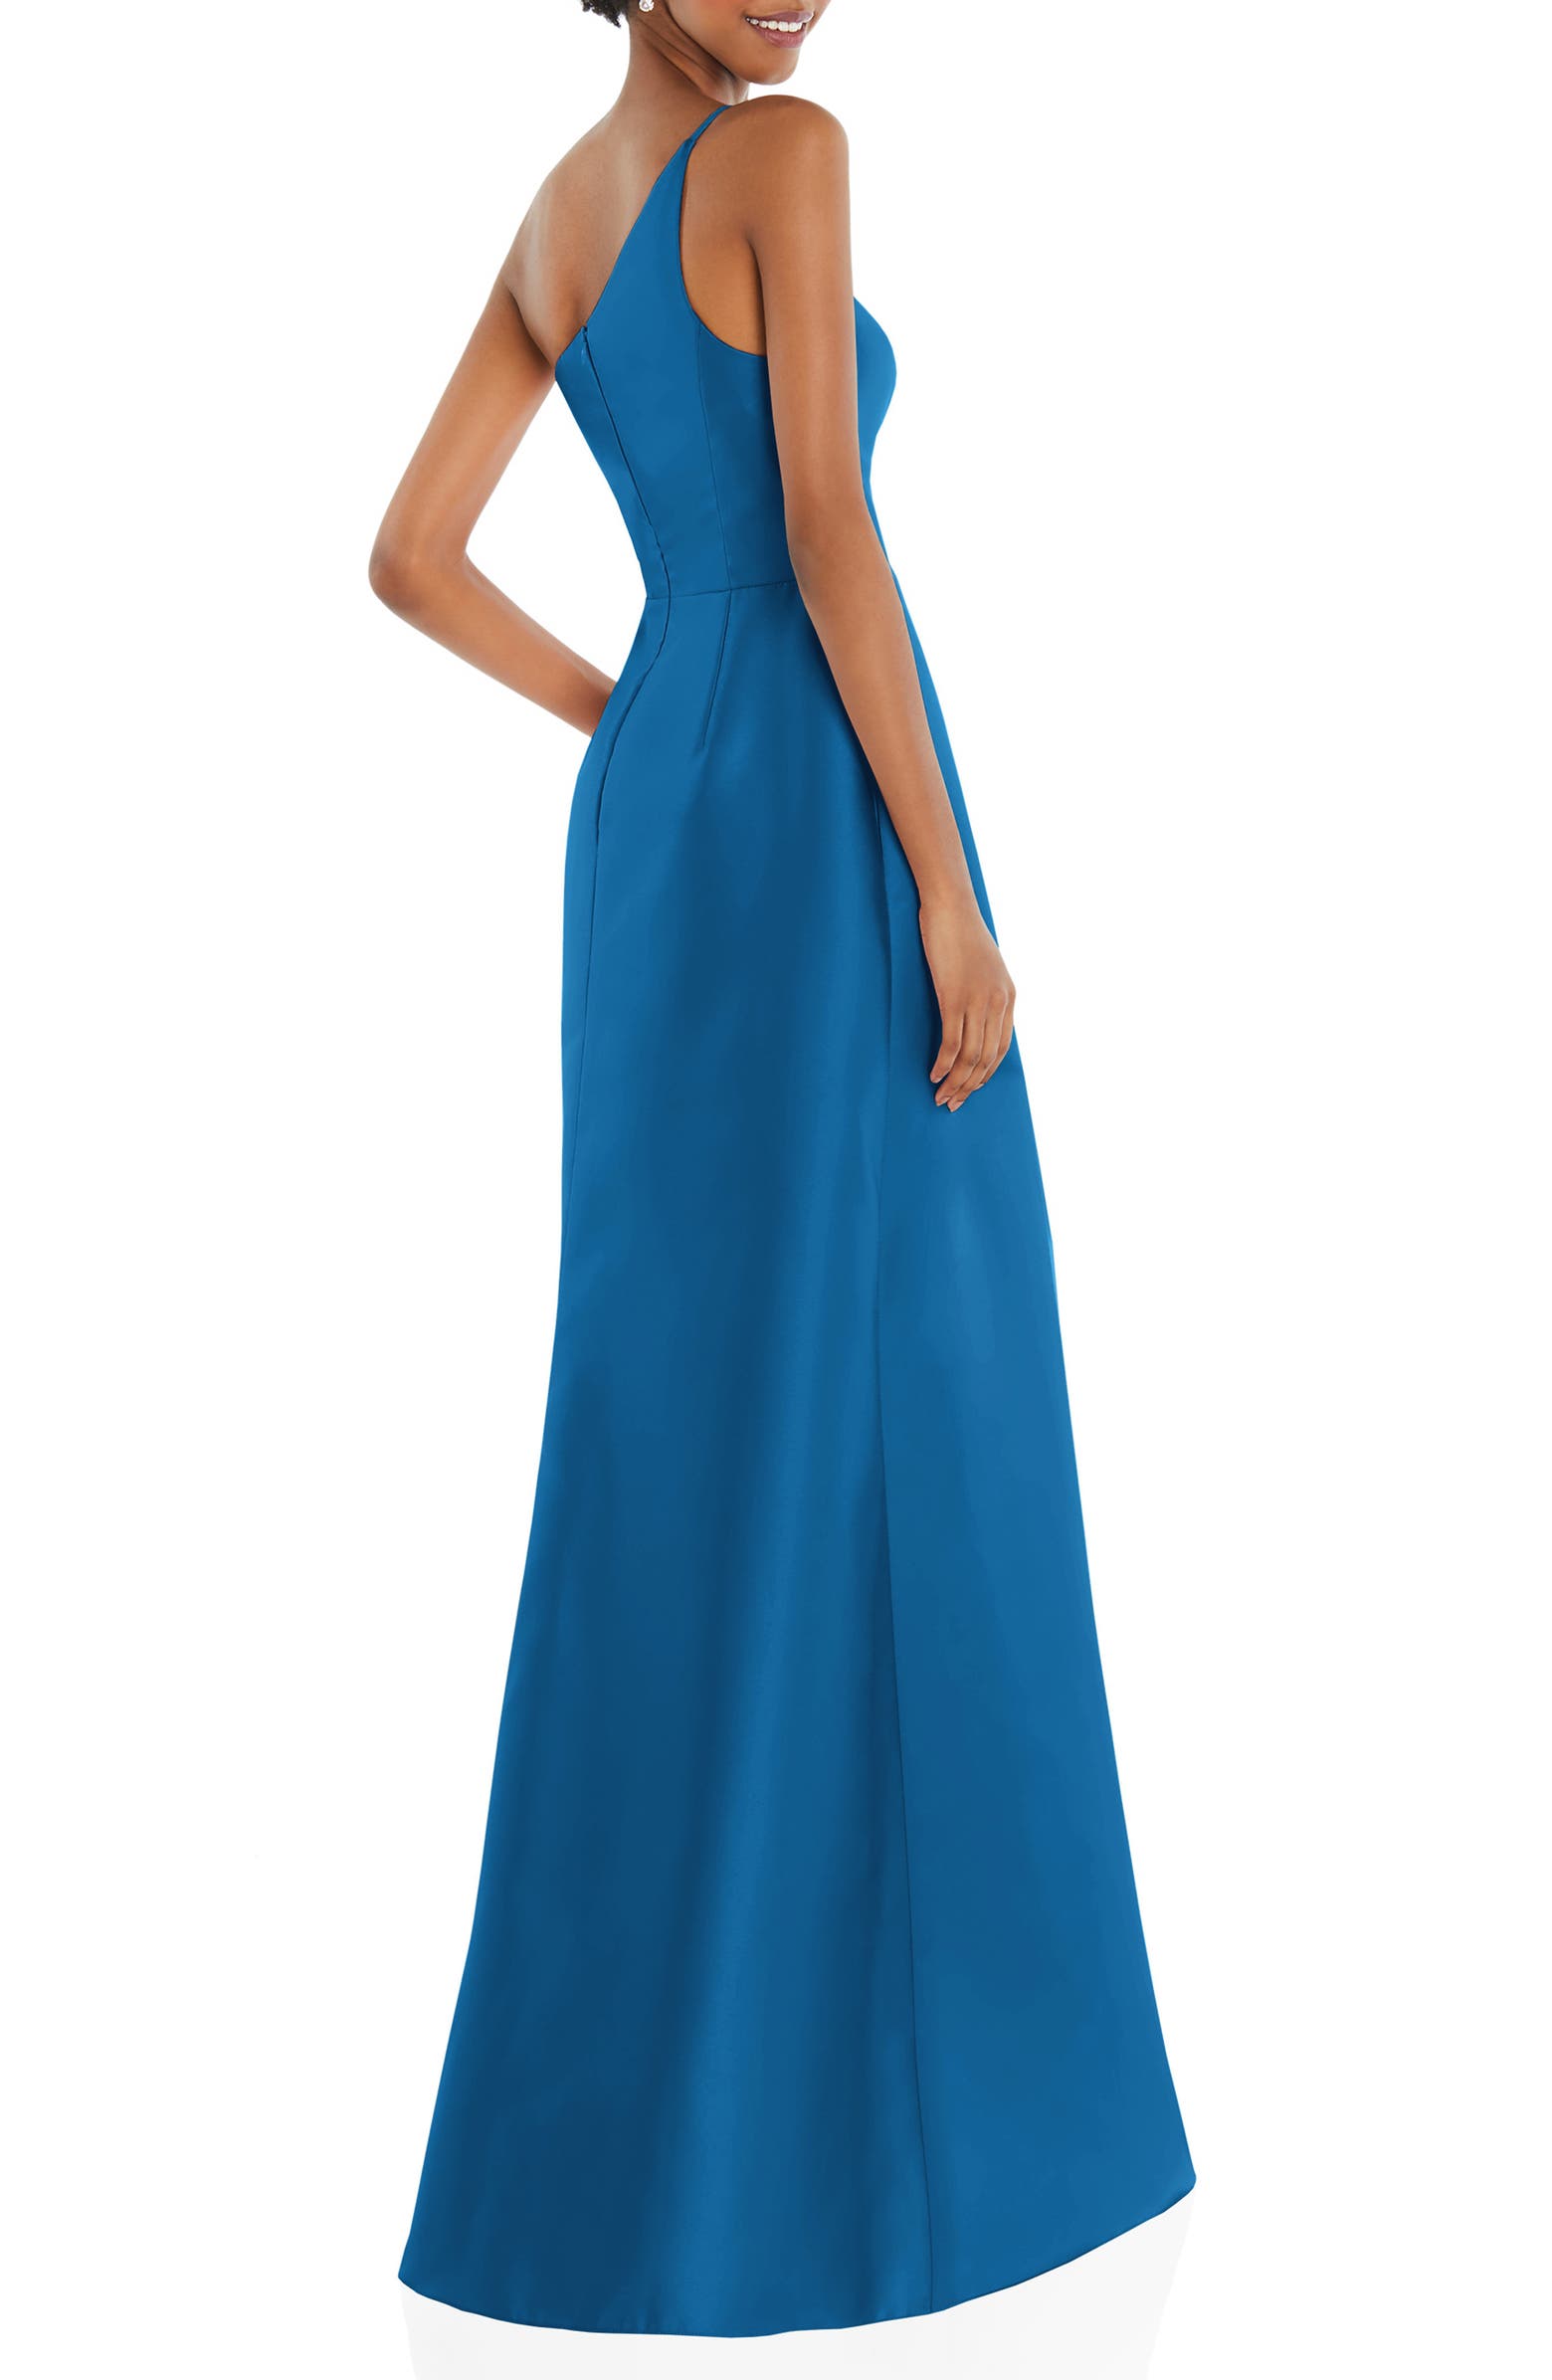 Alfred Sung One-Shoulder Satin Gown | Nordstrom